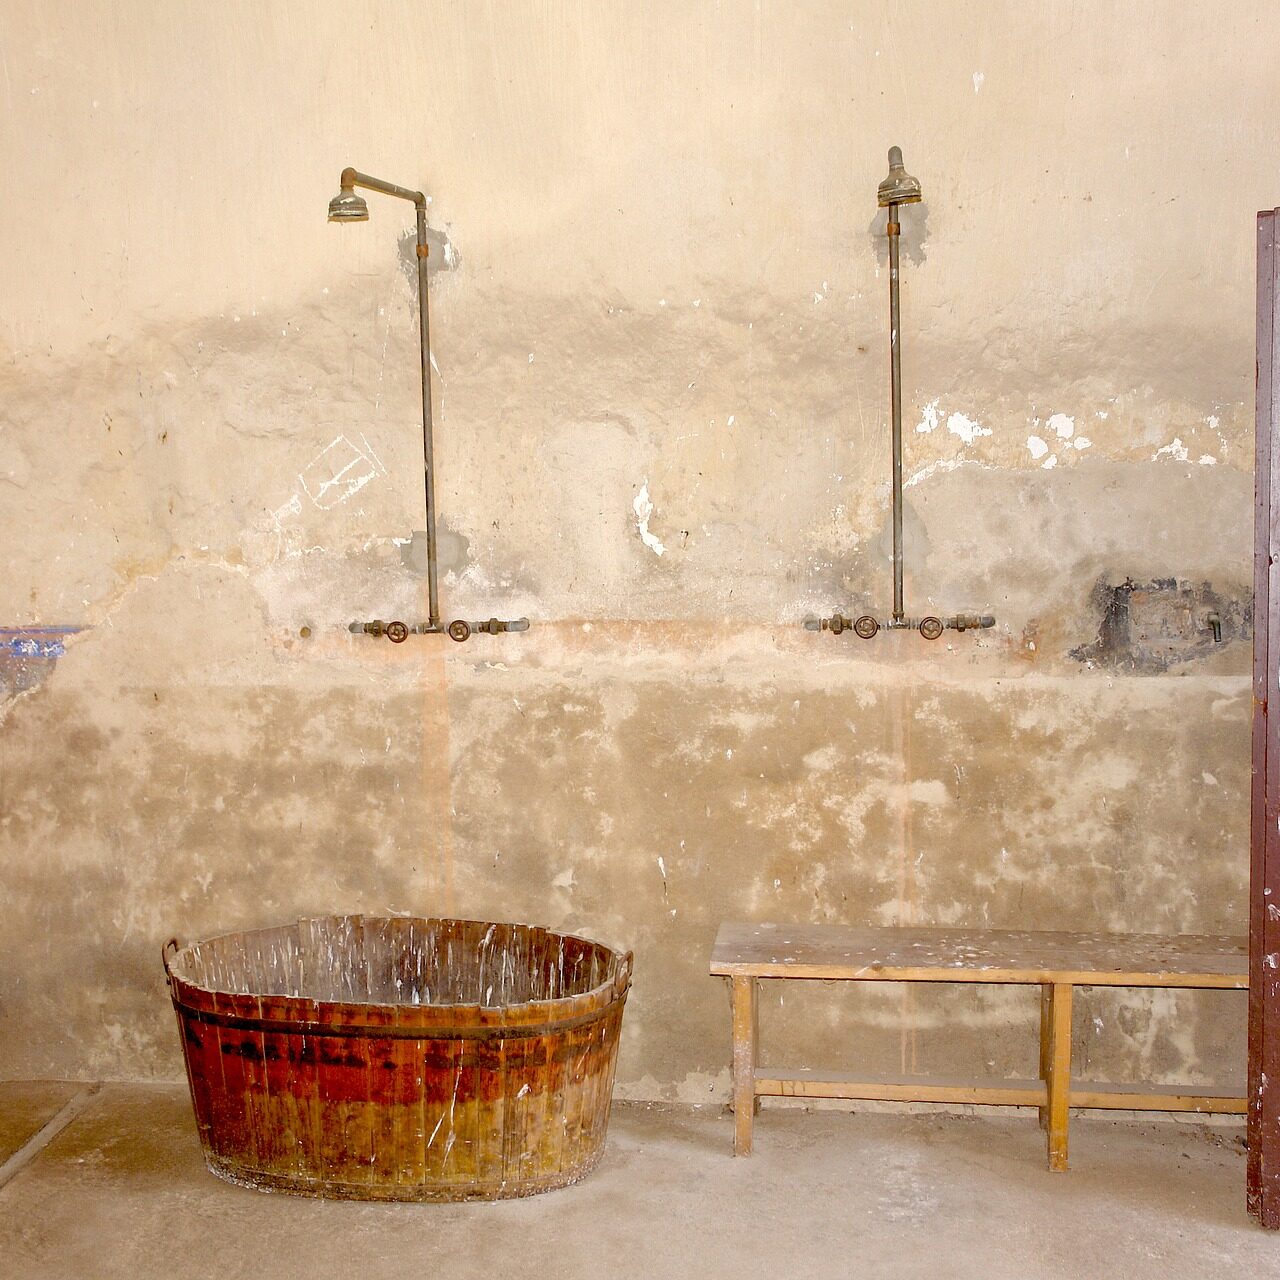 Showers once used in the Terezín concentration camp, north of Prague, northern Czech Republic.